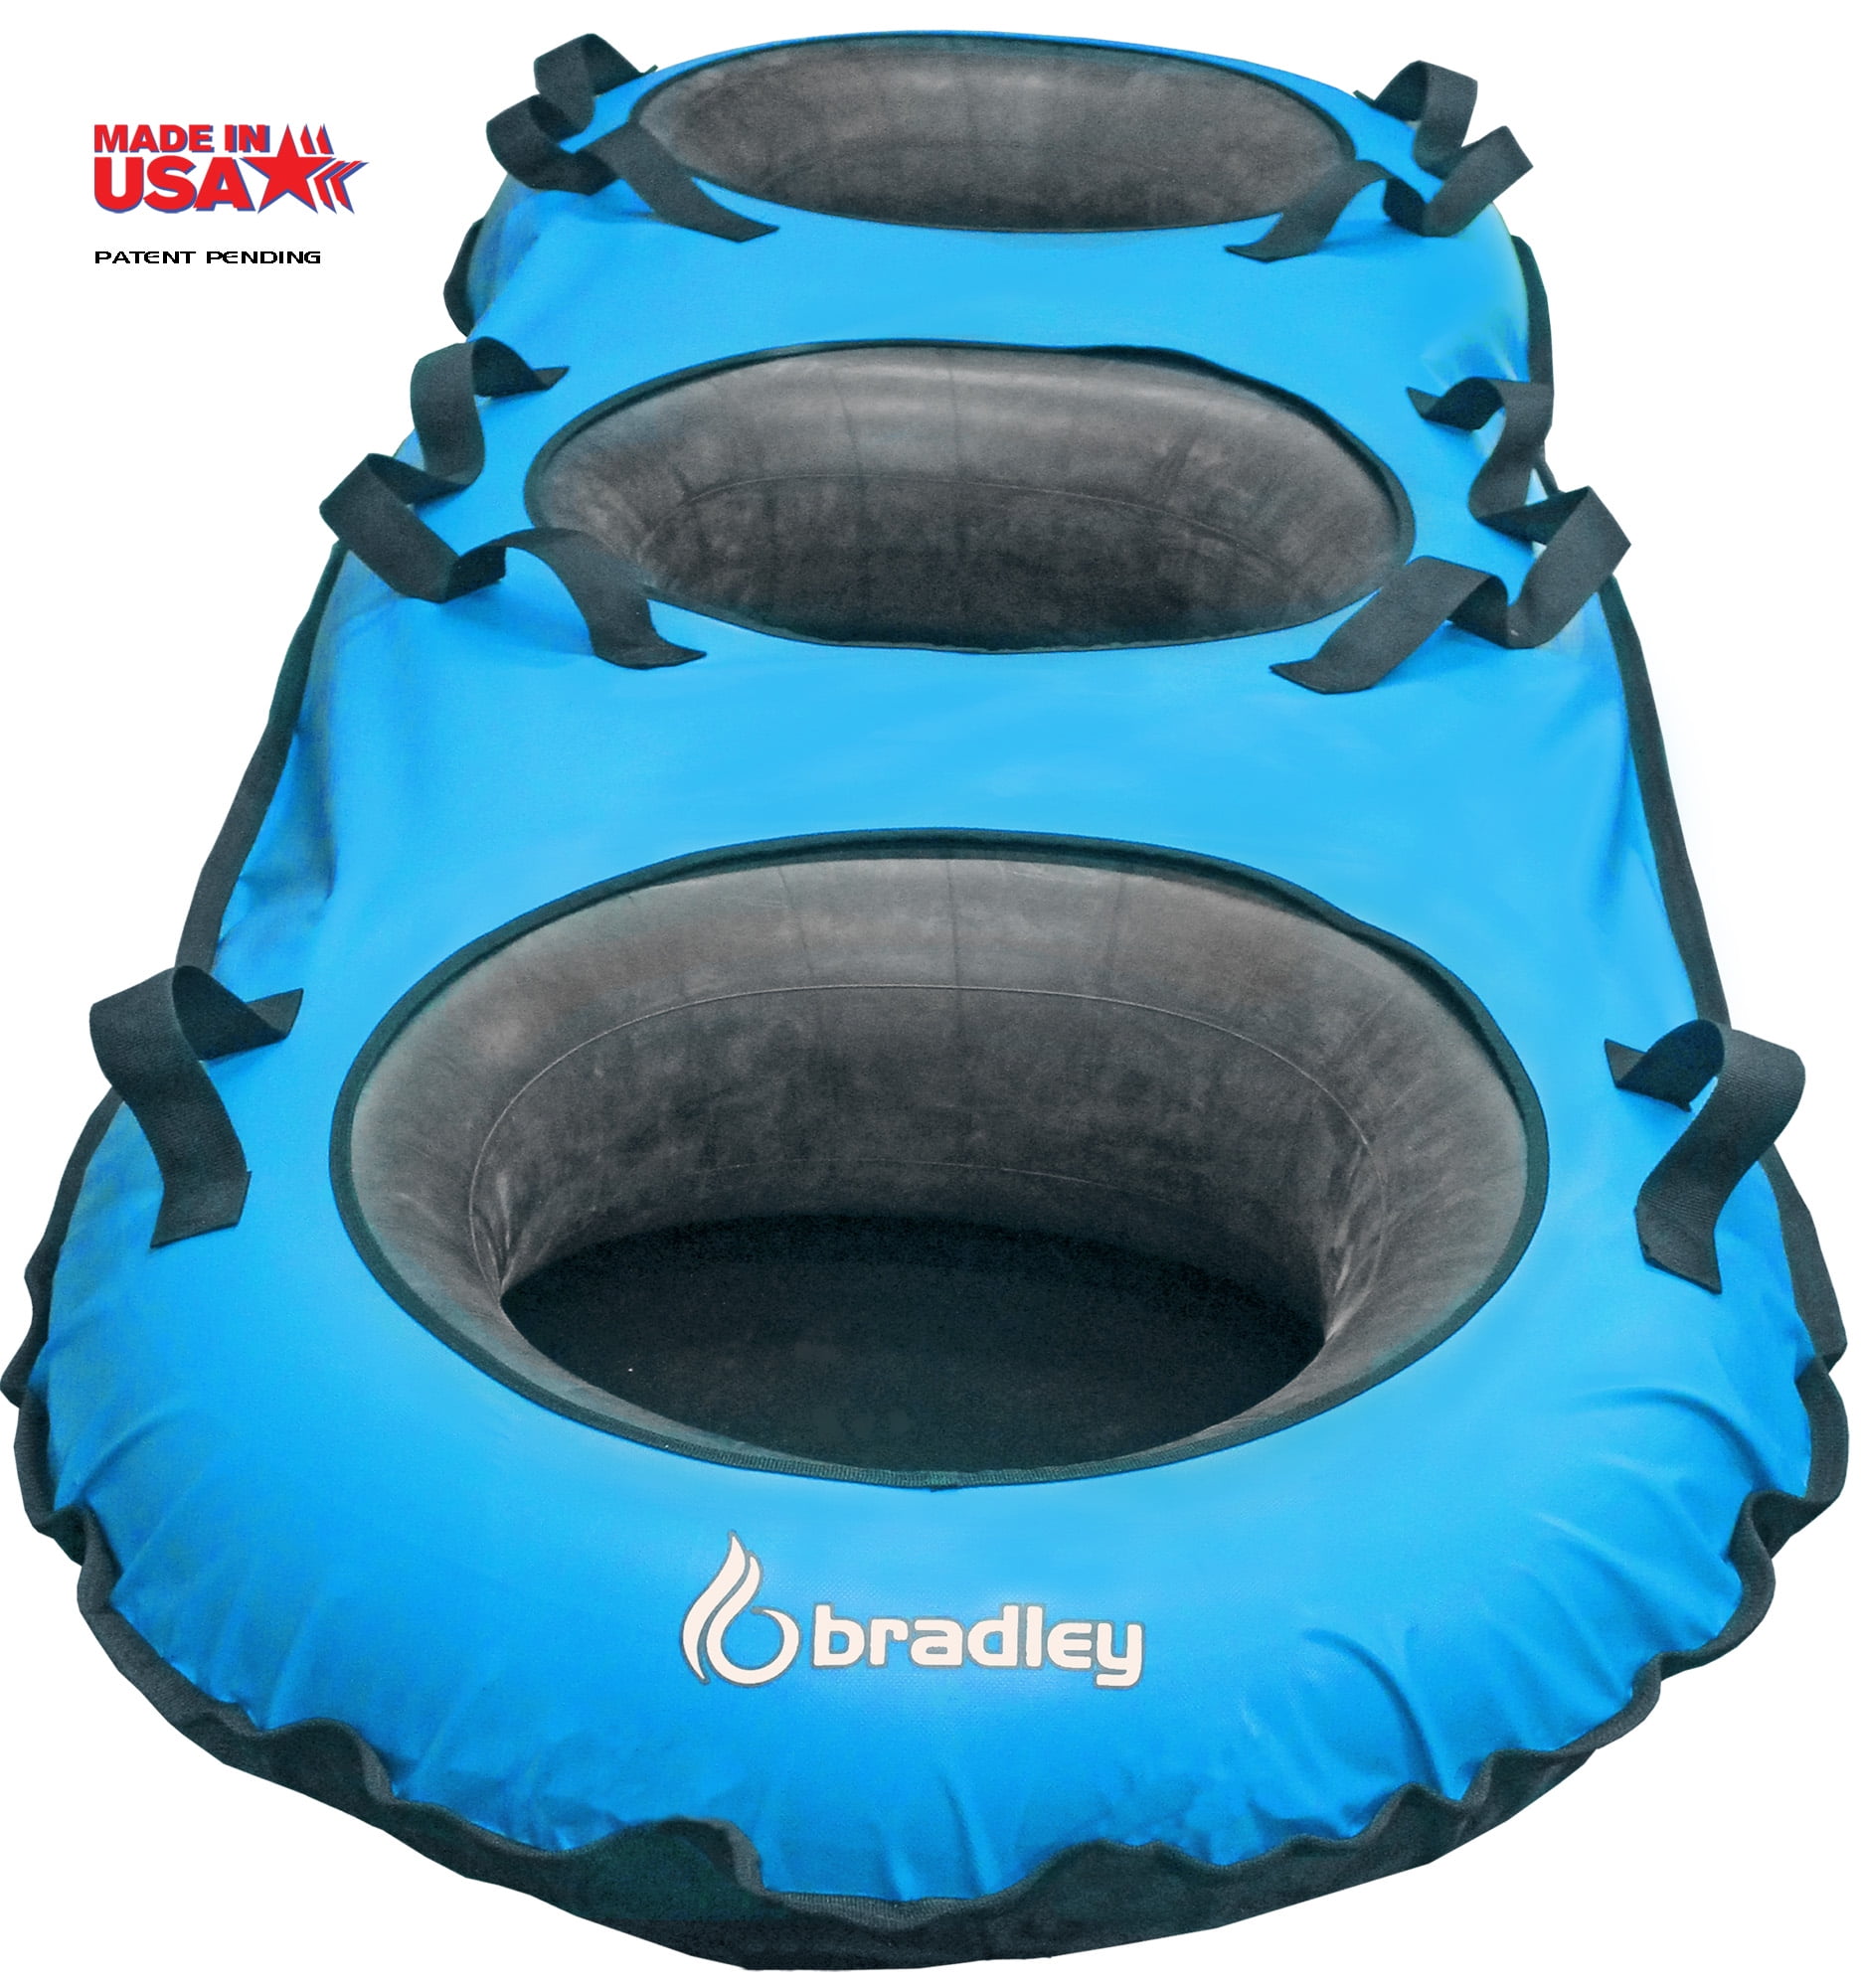 Bradley River Tube with Patented Heavy Duty Cover - Made In USA ...